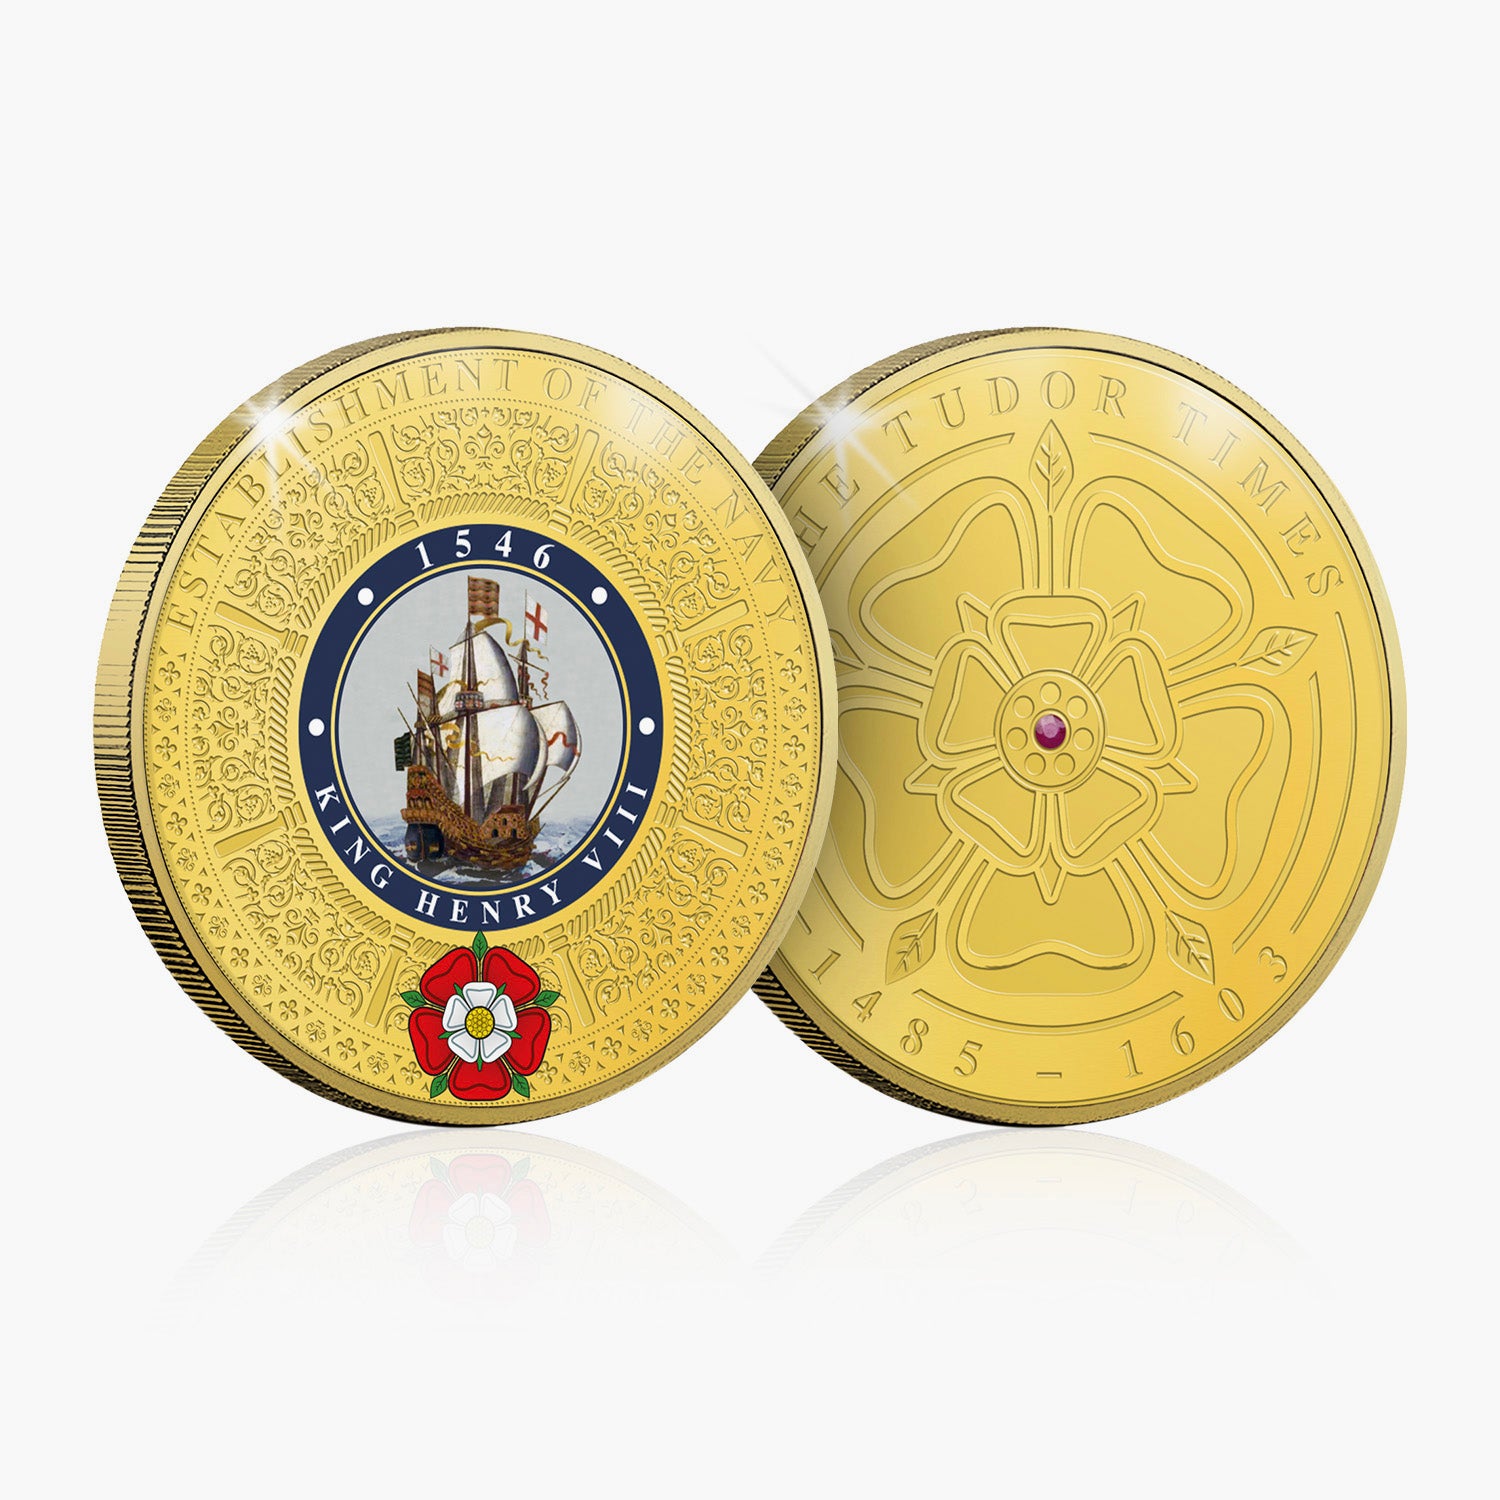 The Establishment of the Navy Gold-Plated Commemorative